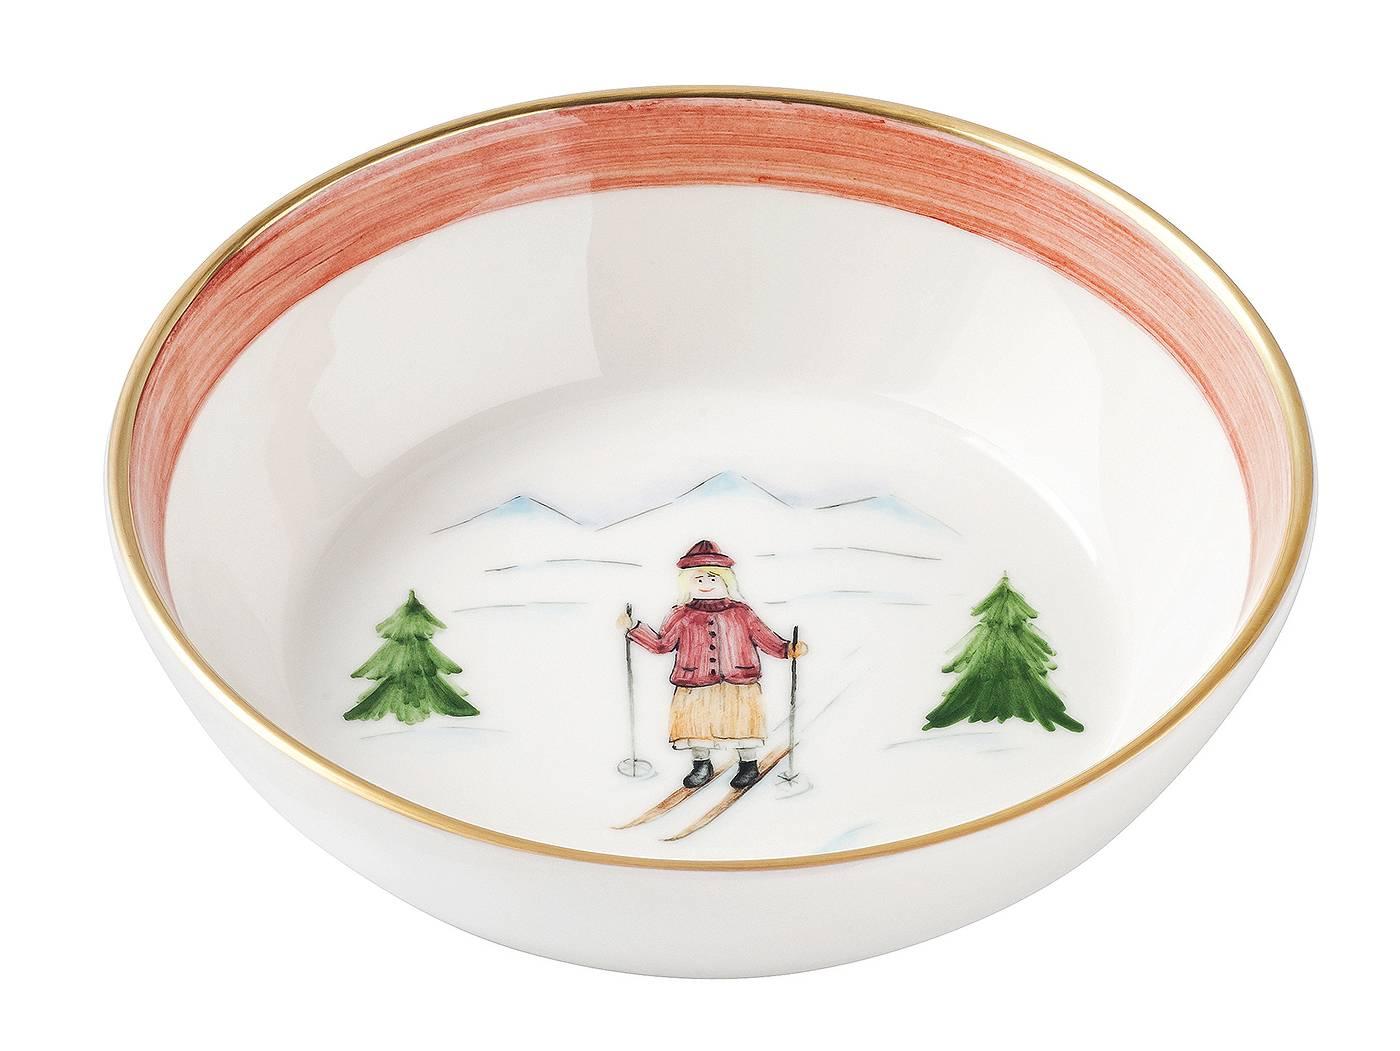 These completely handmade porcelain bowls with a hands-free painted skier decor come as a set with three designs. Hand-painted in a nostalgic design with girl, mother and father. Rimmed with a 24-carat gold or platinum line. Handmade in